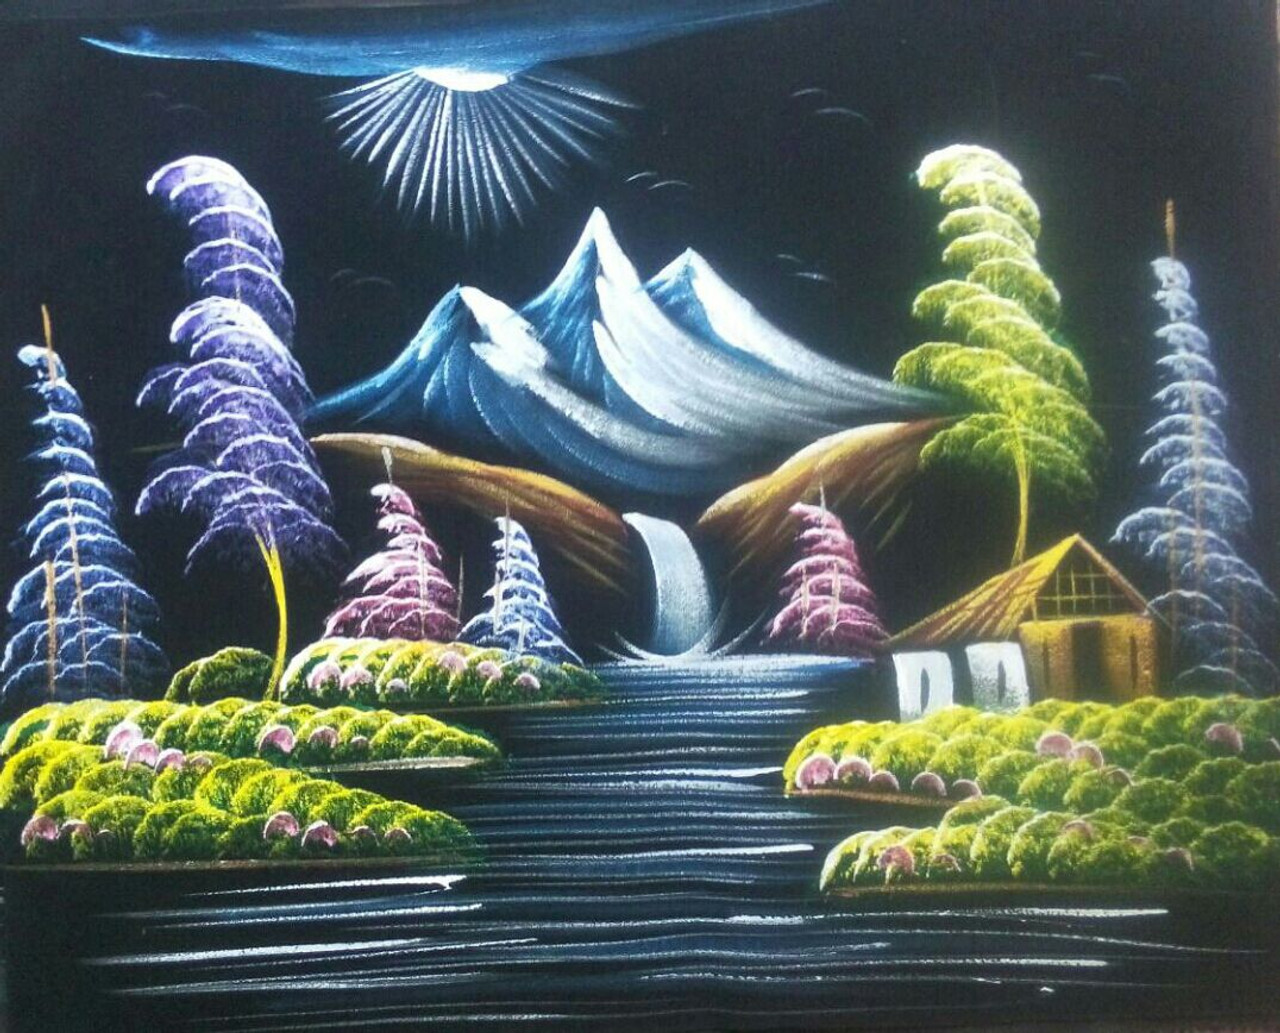 Buy Beautiful Scenery 11 by Community Artists Group@ Rs. 2790 ...